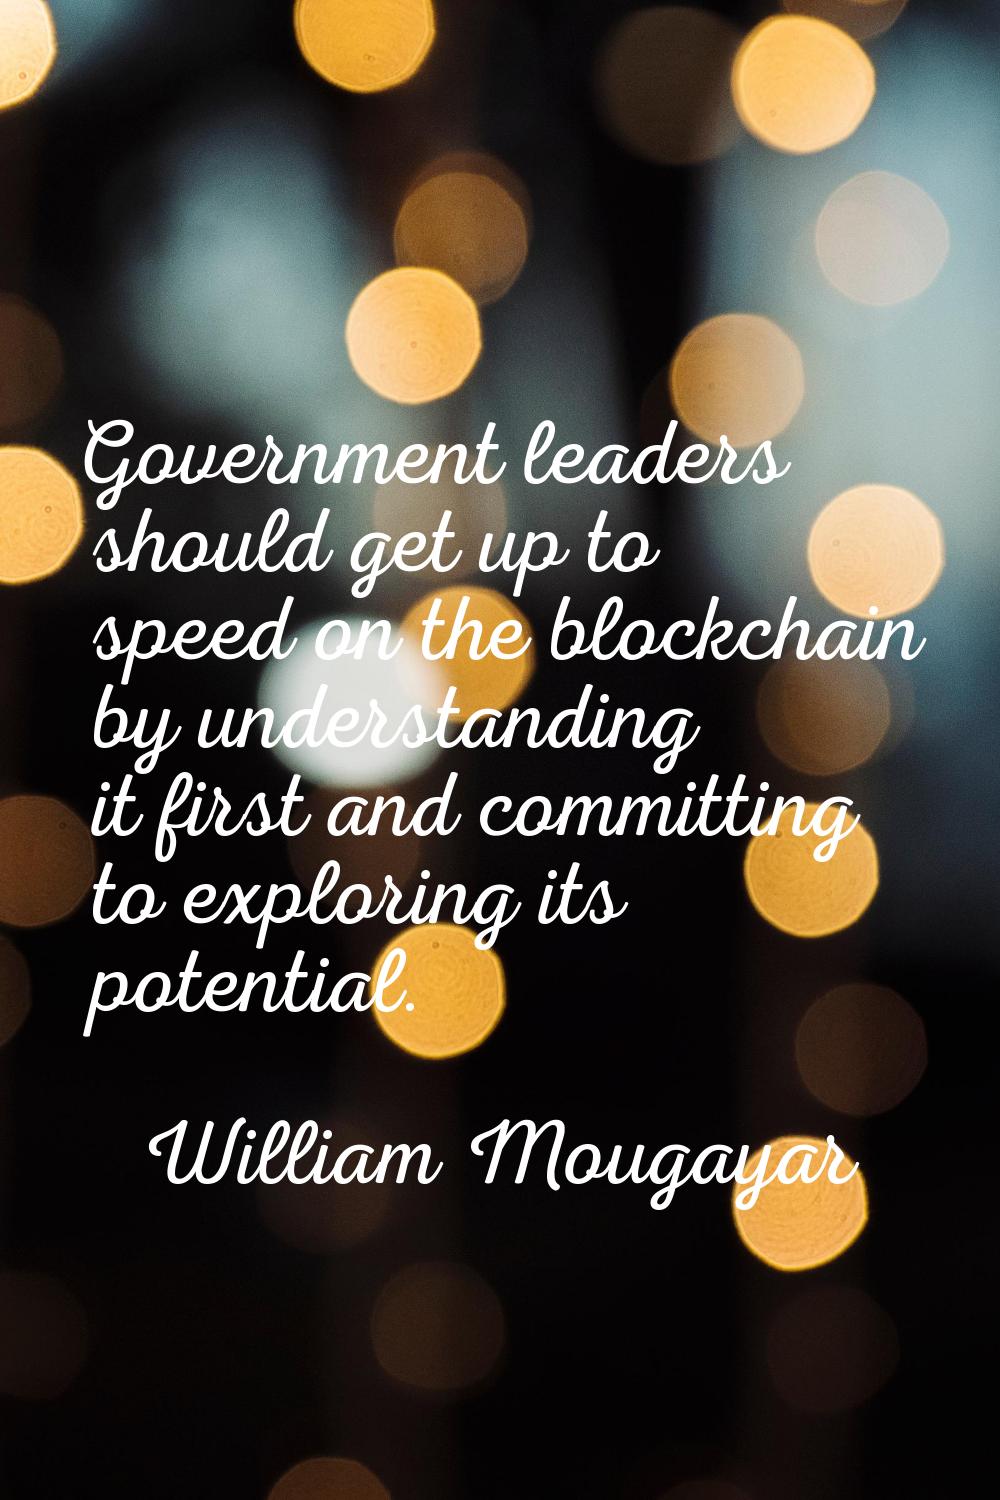 Government leaders should get up to speed on the blockchain by understanding it first and committin